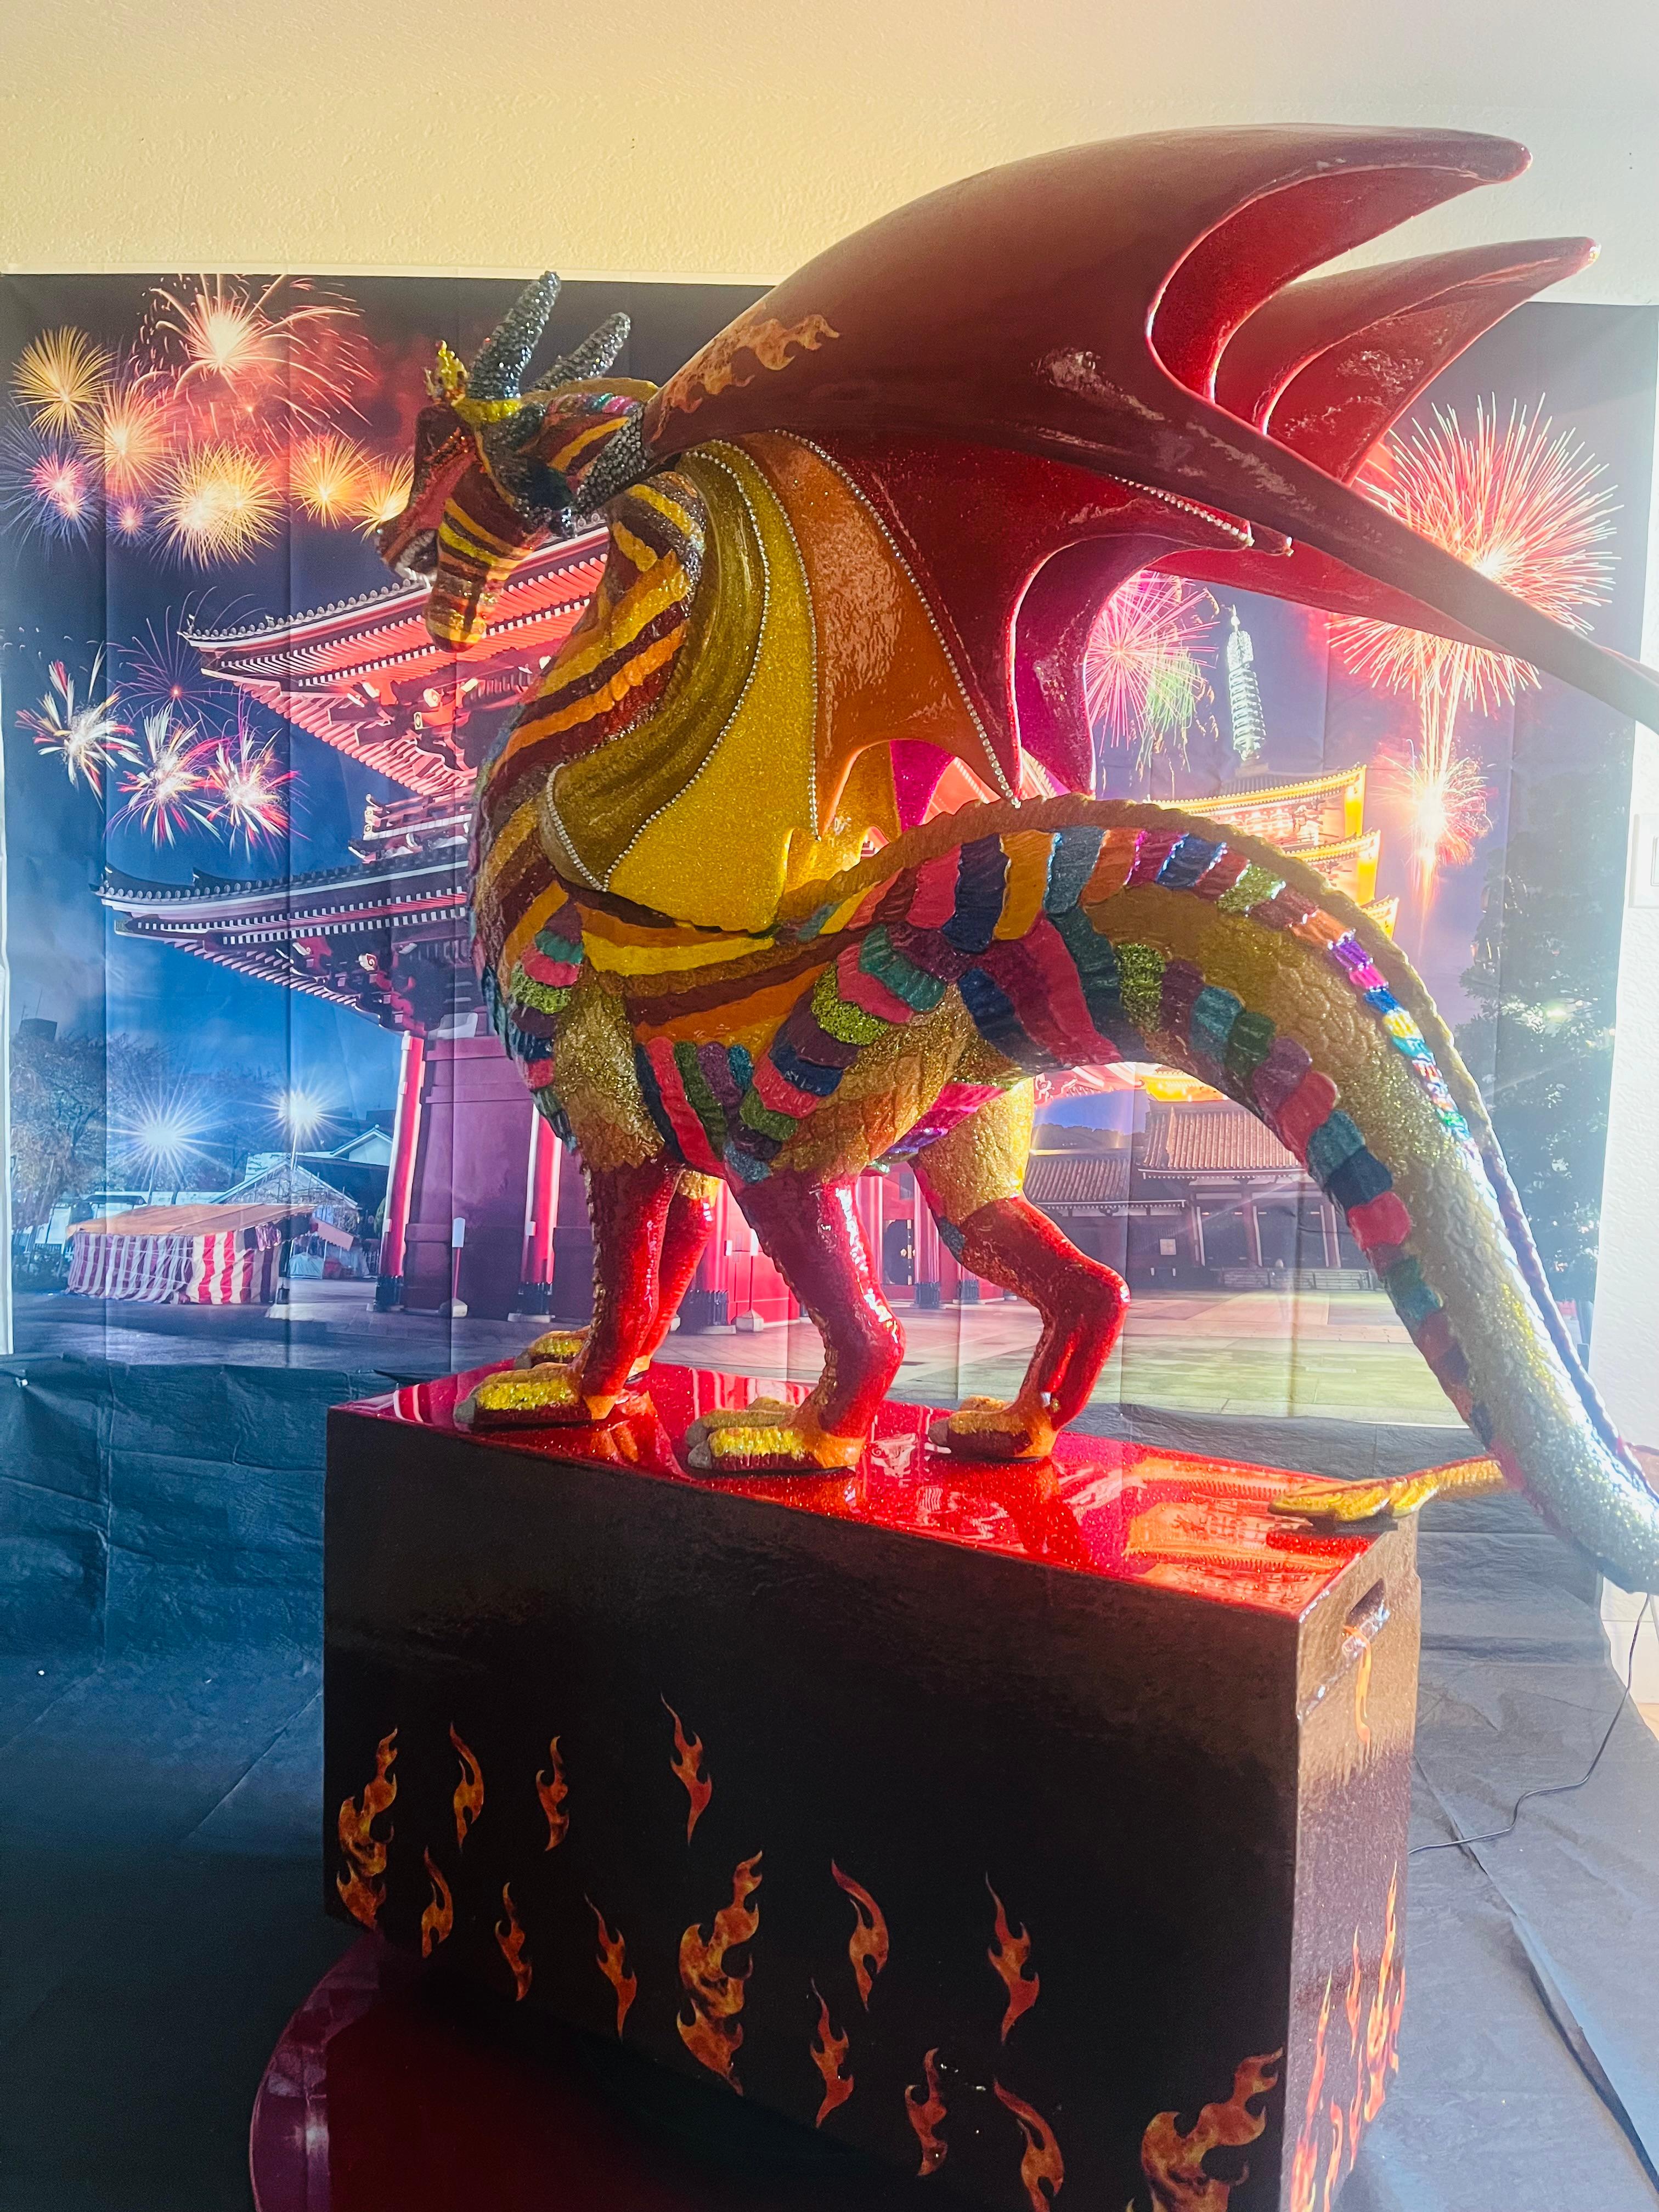                  **ANNUAL SUPER SALE TIL MAY 15th ONLY**
*This Price Won't Be Repeated Again This Year - Take Advantage Of It*

Absolutely and positively one of a kind Dragon Sculpture Masterpiece.

2024 is the year of the Dragon, a very special